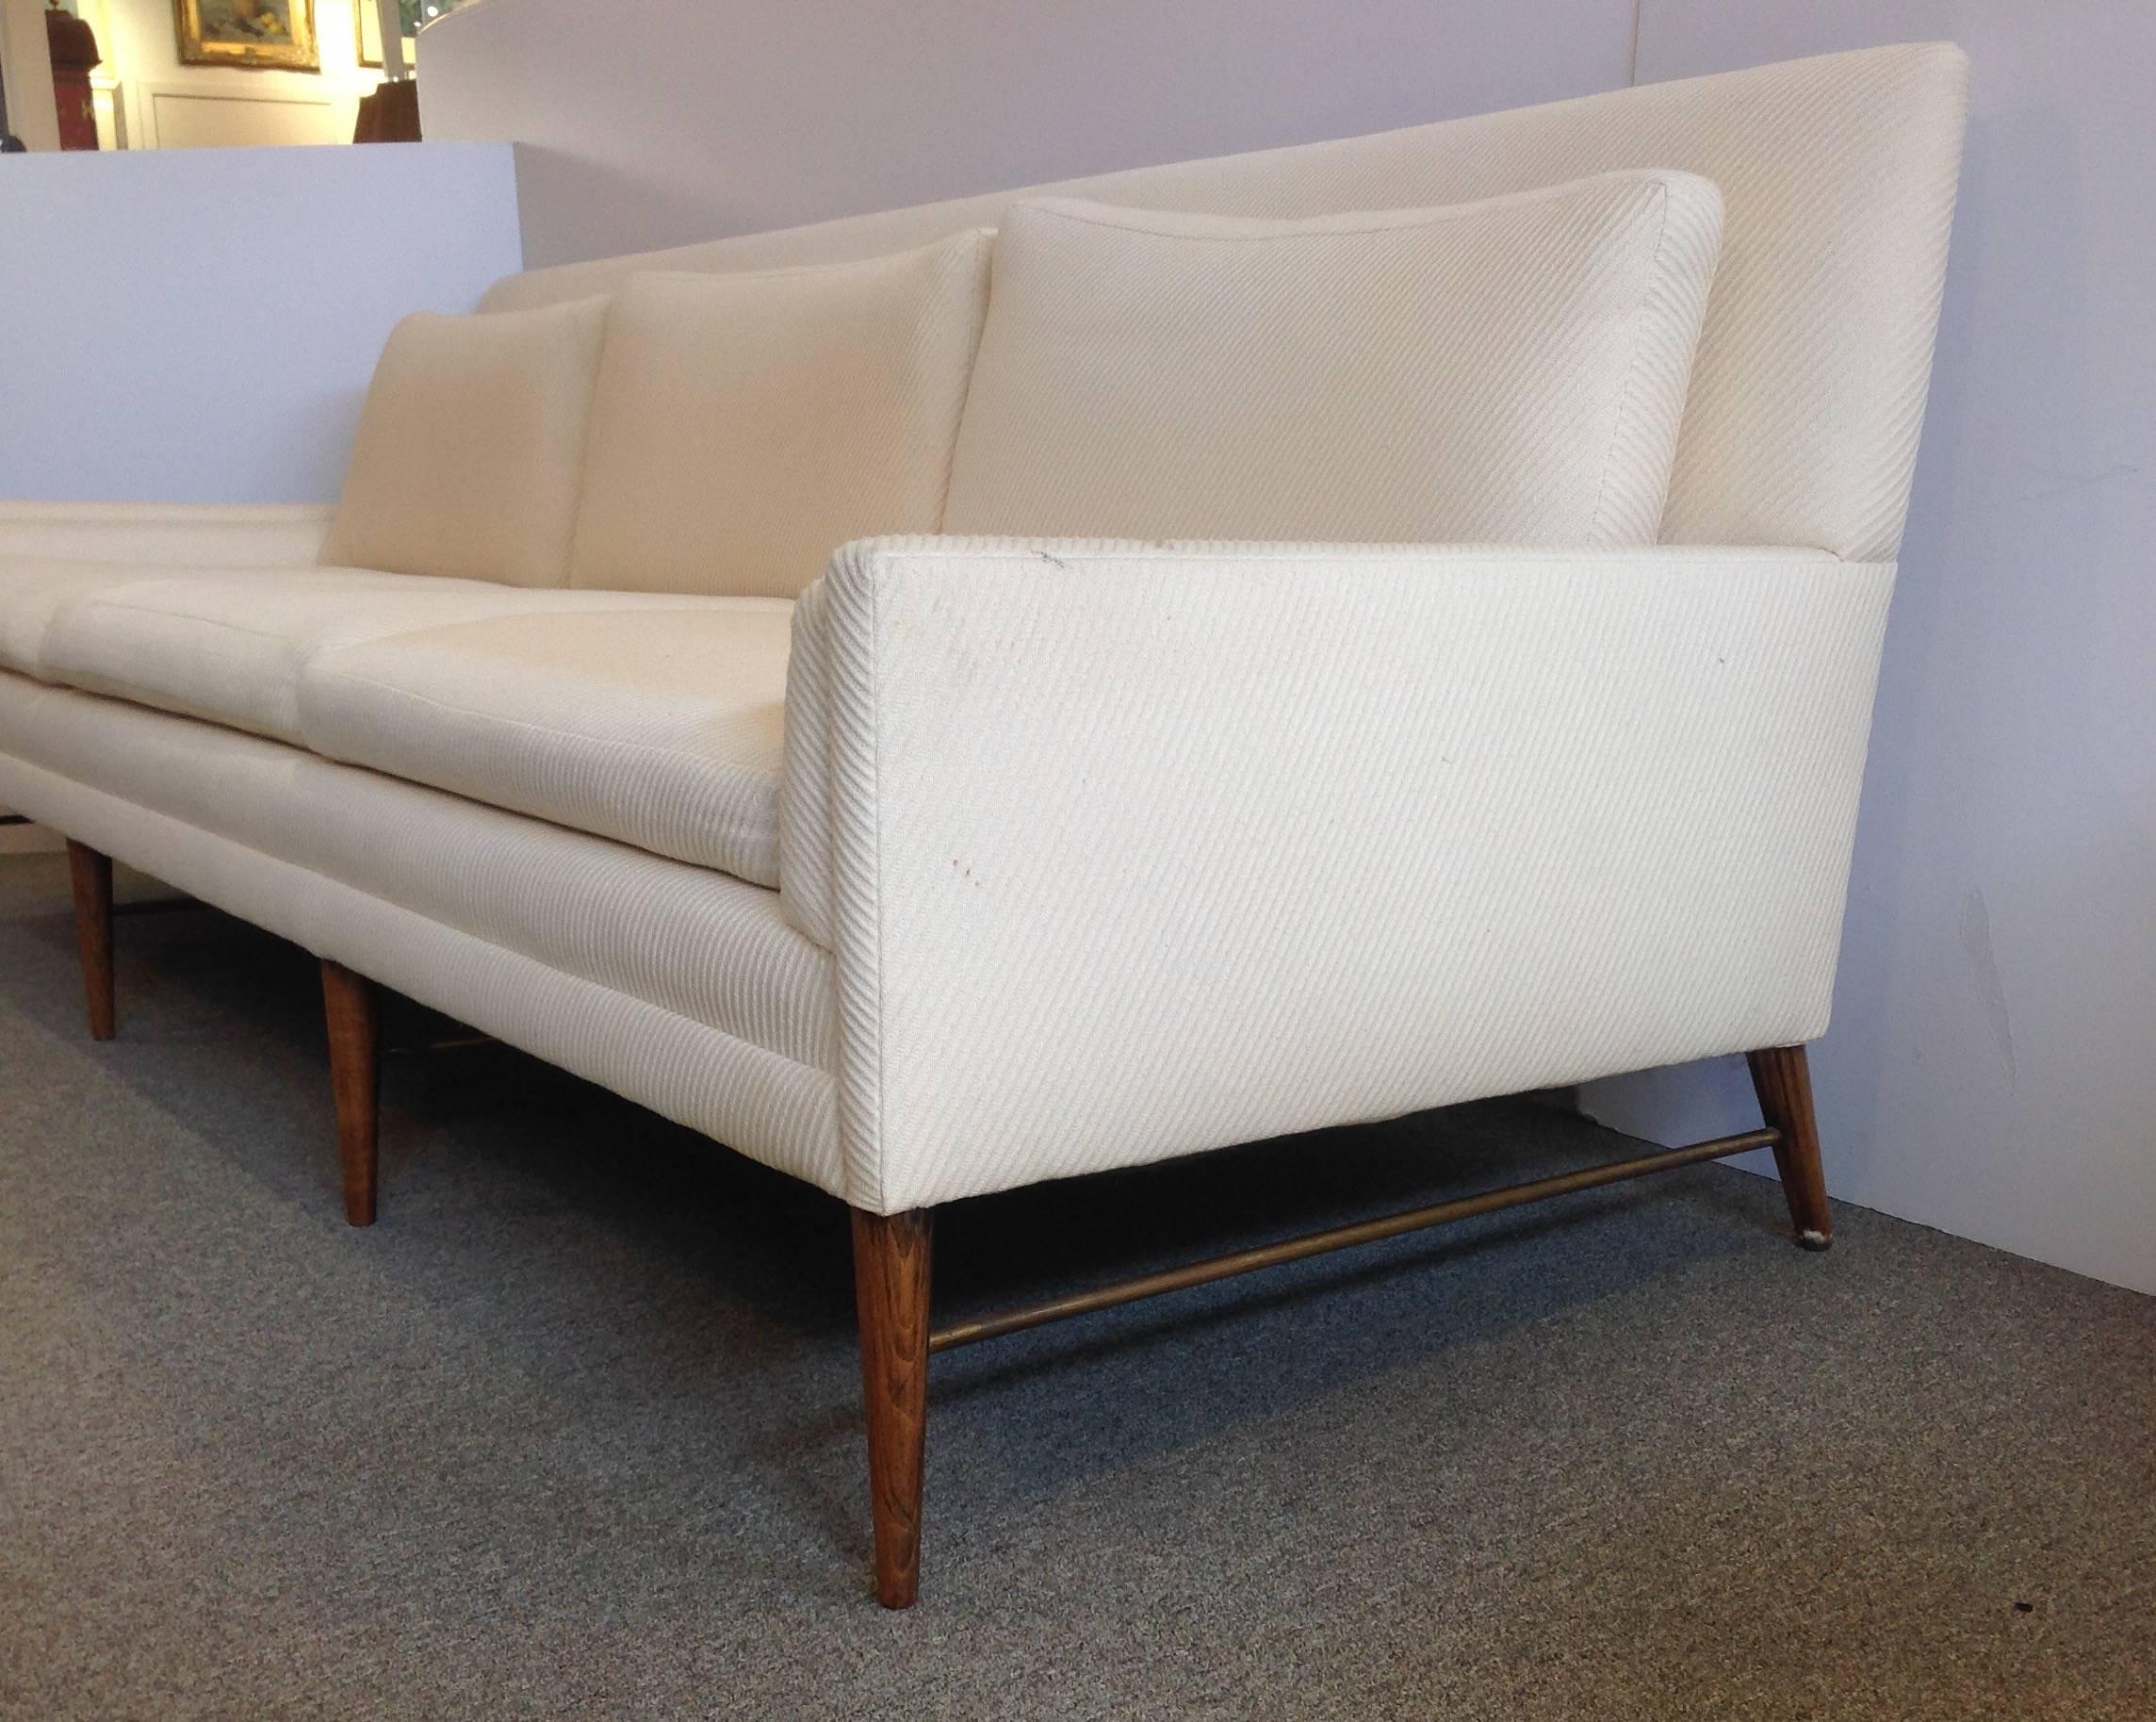 Rare long Paul McCobb Directional sofa on a stretcher base. This extra-long sofa has eight legs with brass rail. The upholstery is a textured off-white with no rips but could be cleaned, circa 1960s. Measures: 96